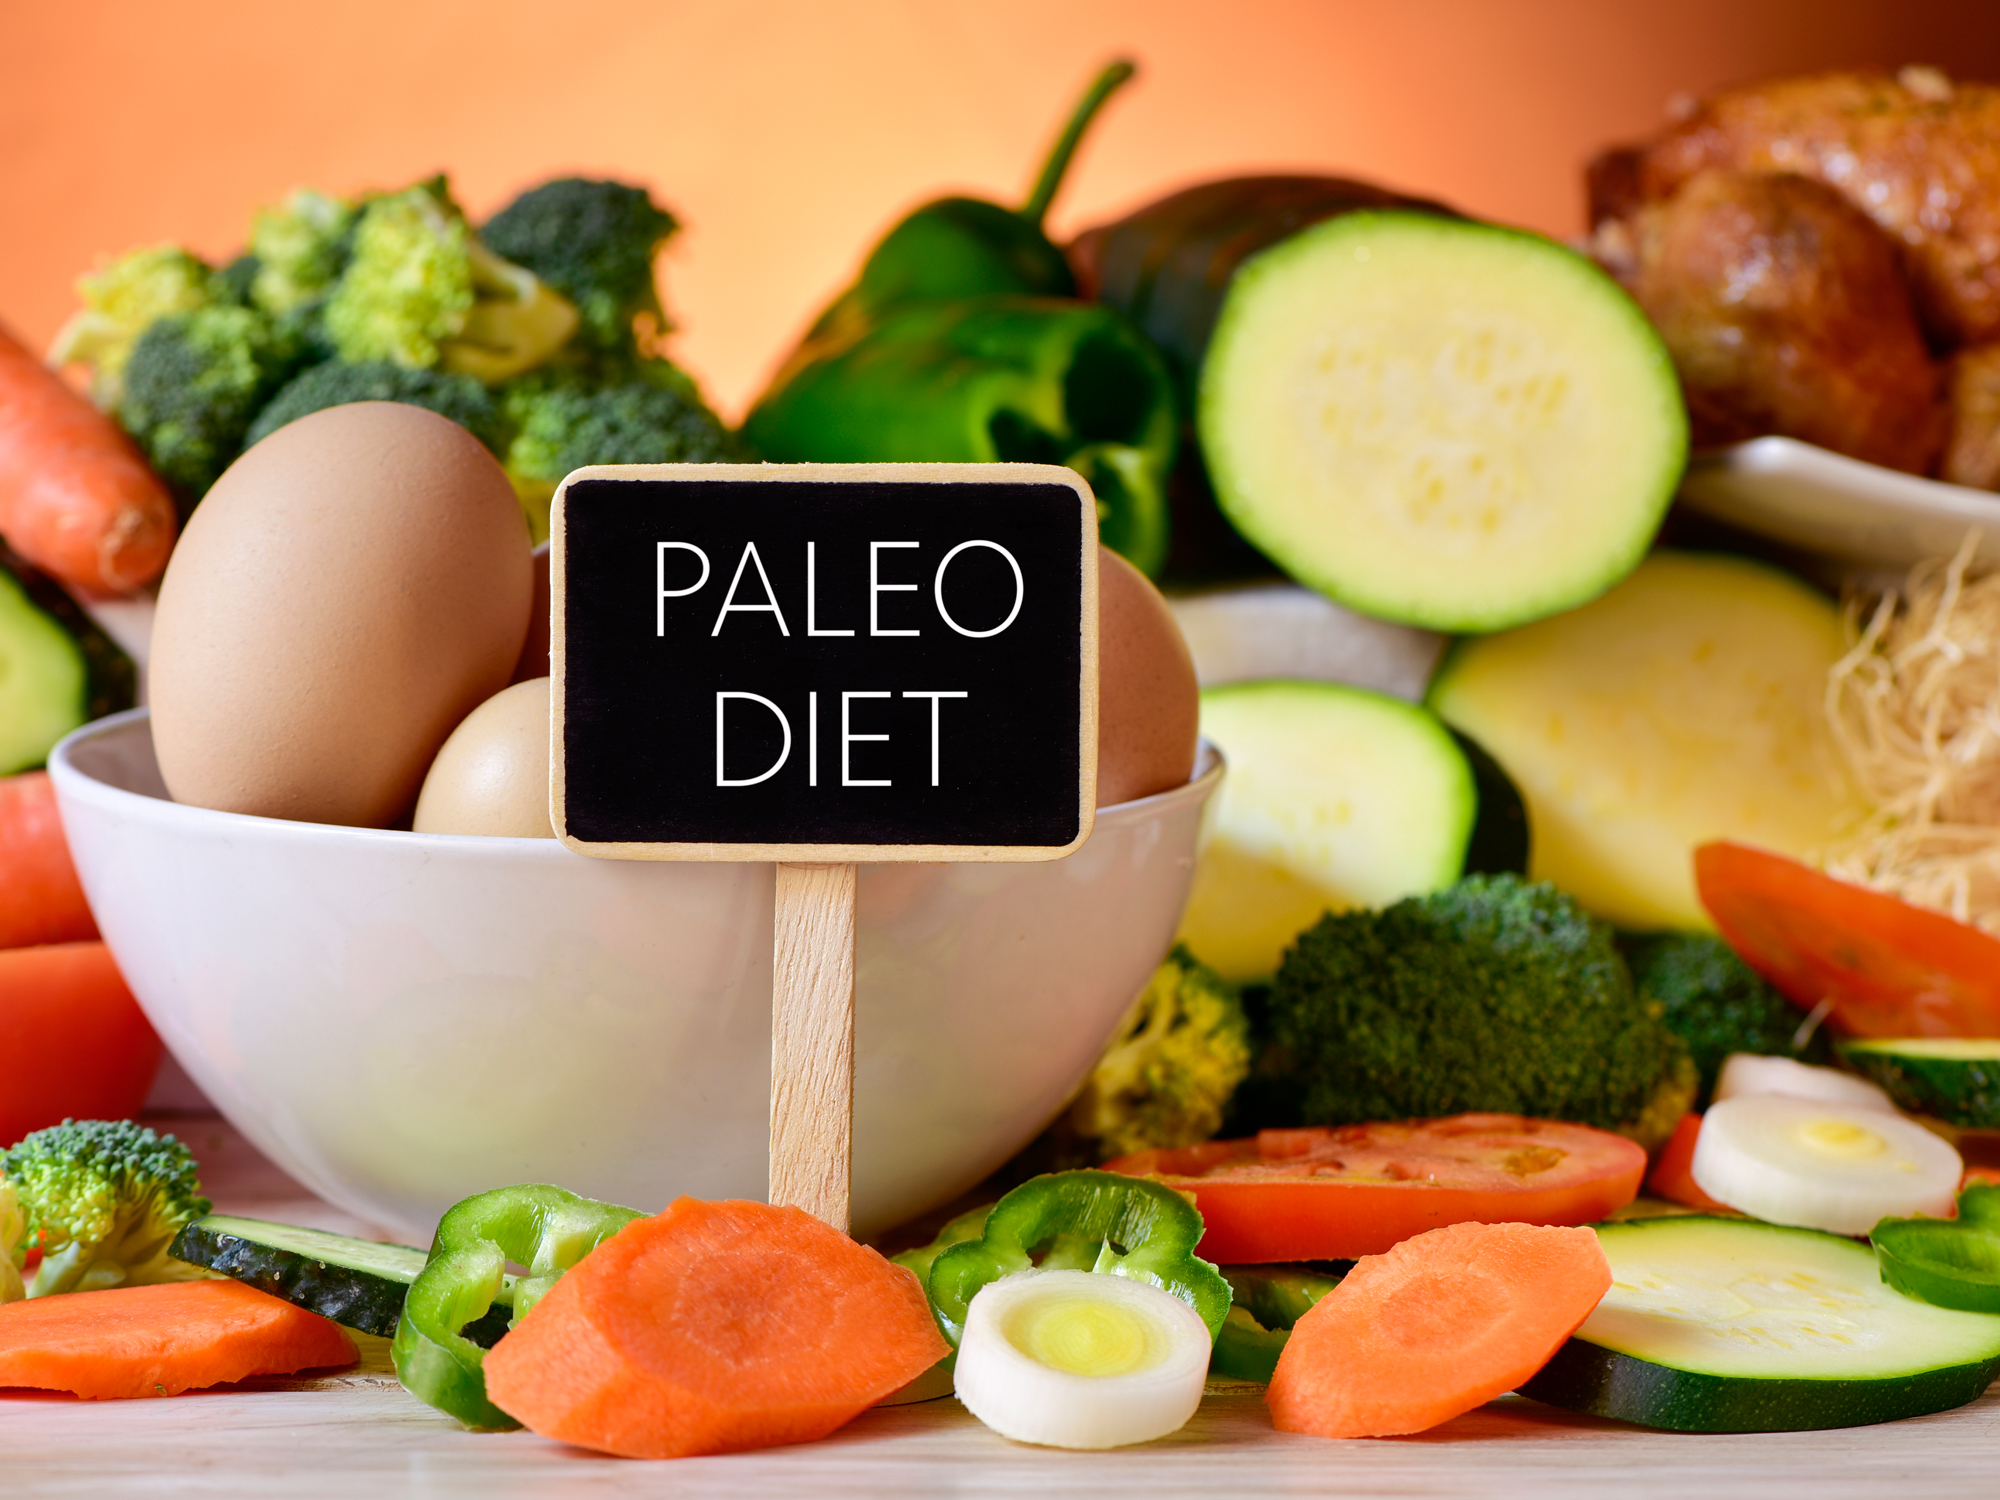 How to avoid this Paleo pitfall